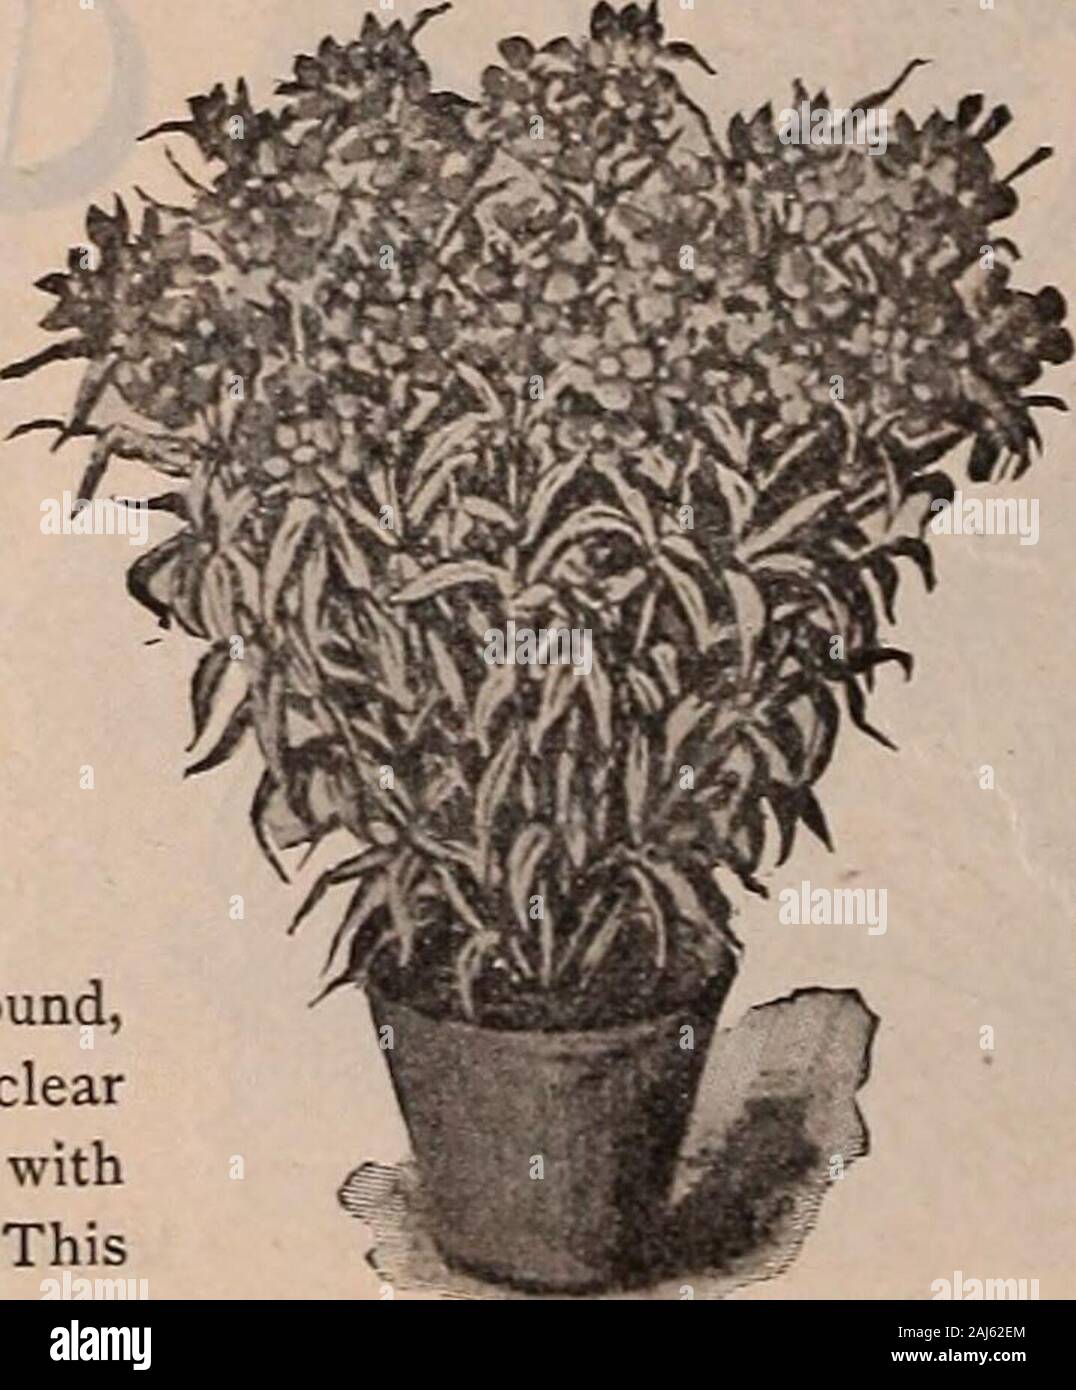 W.W Rawson & Co seedsmen / W.W Rawson & Co. . nching, dark brown Wallflower. It hasinherited altogether from the former the exceeding rich blooming, andfrom the latter the fine habit of growth, thedeep green foliage and the dark brown flowers.Owing to these excellent qualities it is a mostvaluable addition to our cut flowers for autumnand winter use. Per pkt., 15 cts.; 2 for 25 cts. This highly interesting new varietypresents a most unusual feature, which isthat the flowers are of different colors onthe same plant and that they are variouslyblotched, splashed, striped and borderedwith these se Stock Photo